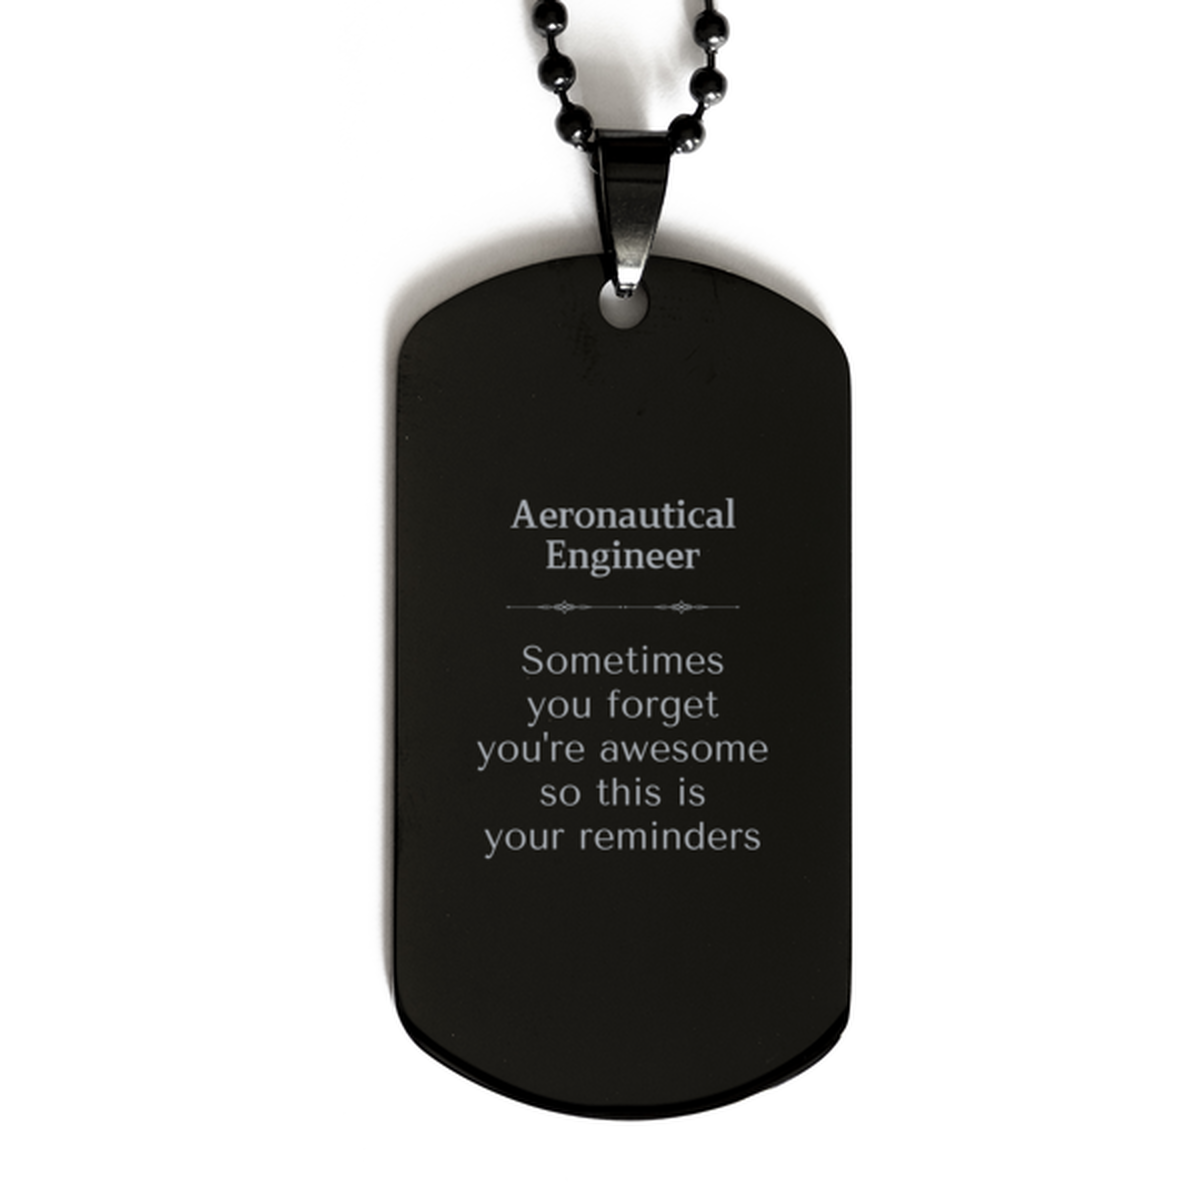 Sentimental Aeronautical Engineer Black Dog Tag, Aeronautical Engineer Sometimes you forget you're awesome so this is your reminders, Graduation Christmas Birthday Gifts for Aeronautical Engineer, Men, Women, Coworkers